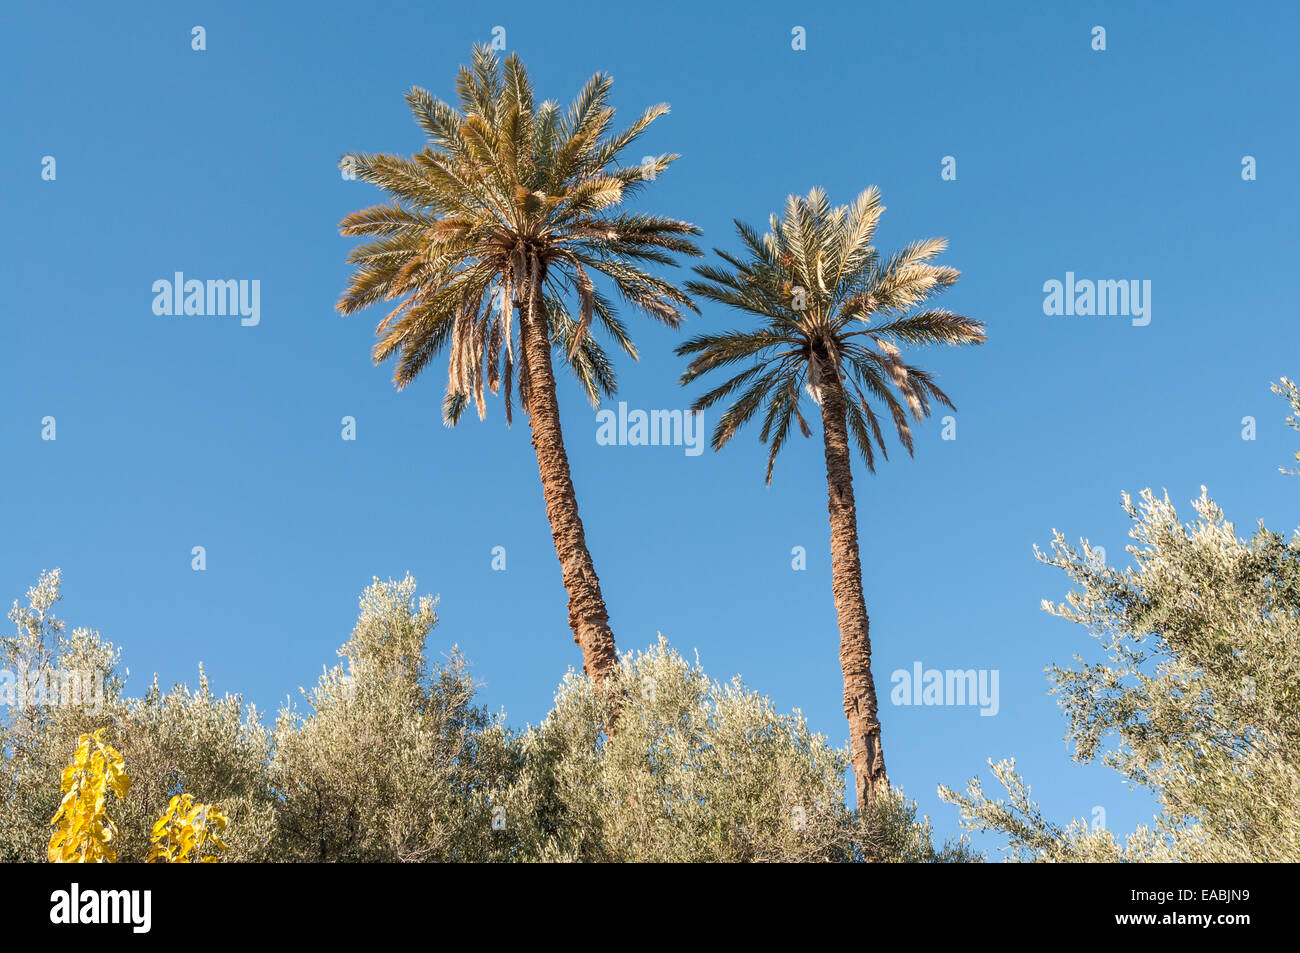 Date palm trees in Morocco, Africa Stock Photo